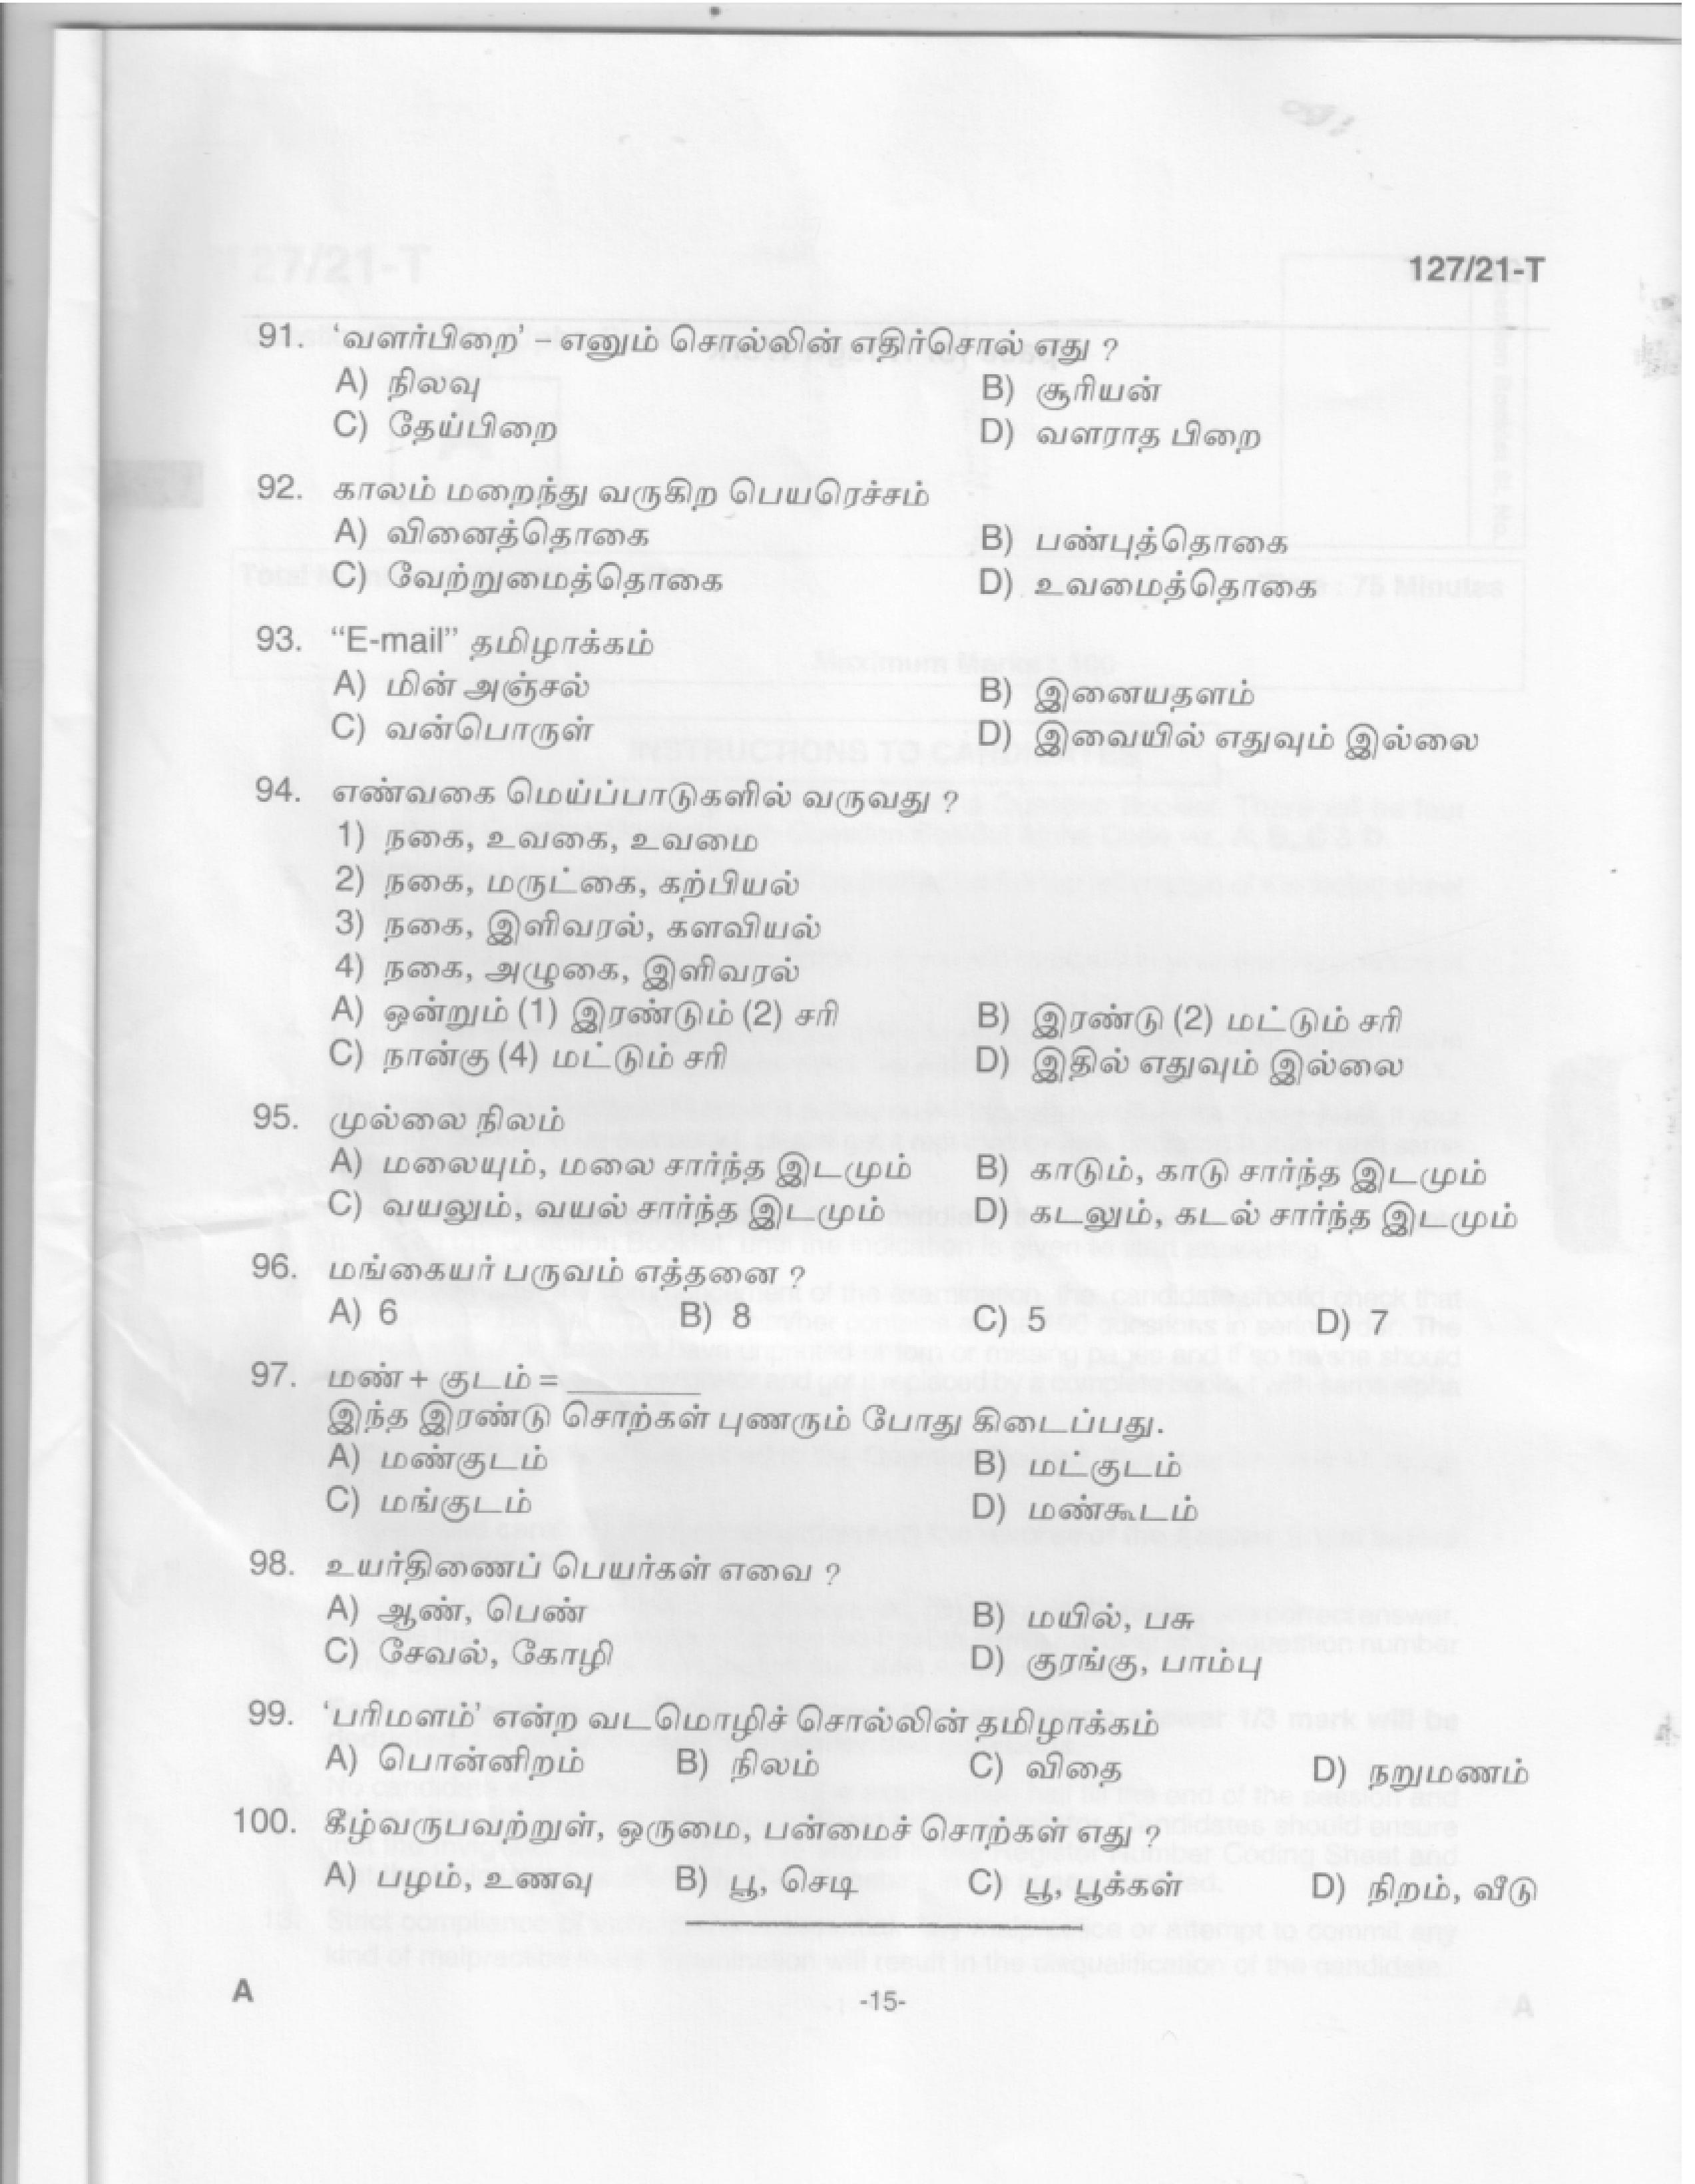 Office Attendant and Laboratory Attender Tamil Exam 2021 Code 1272021 13